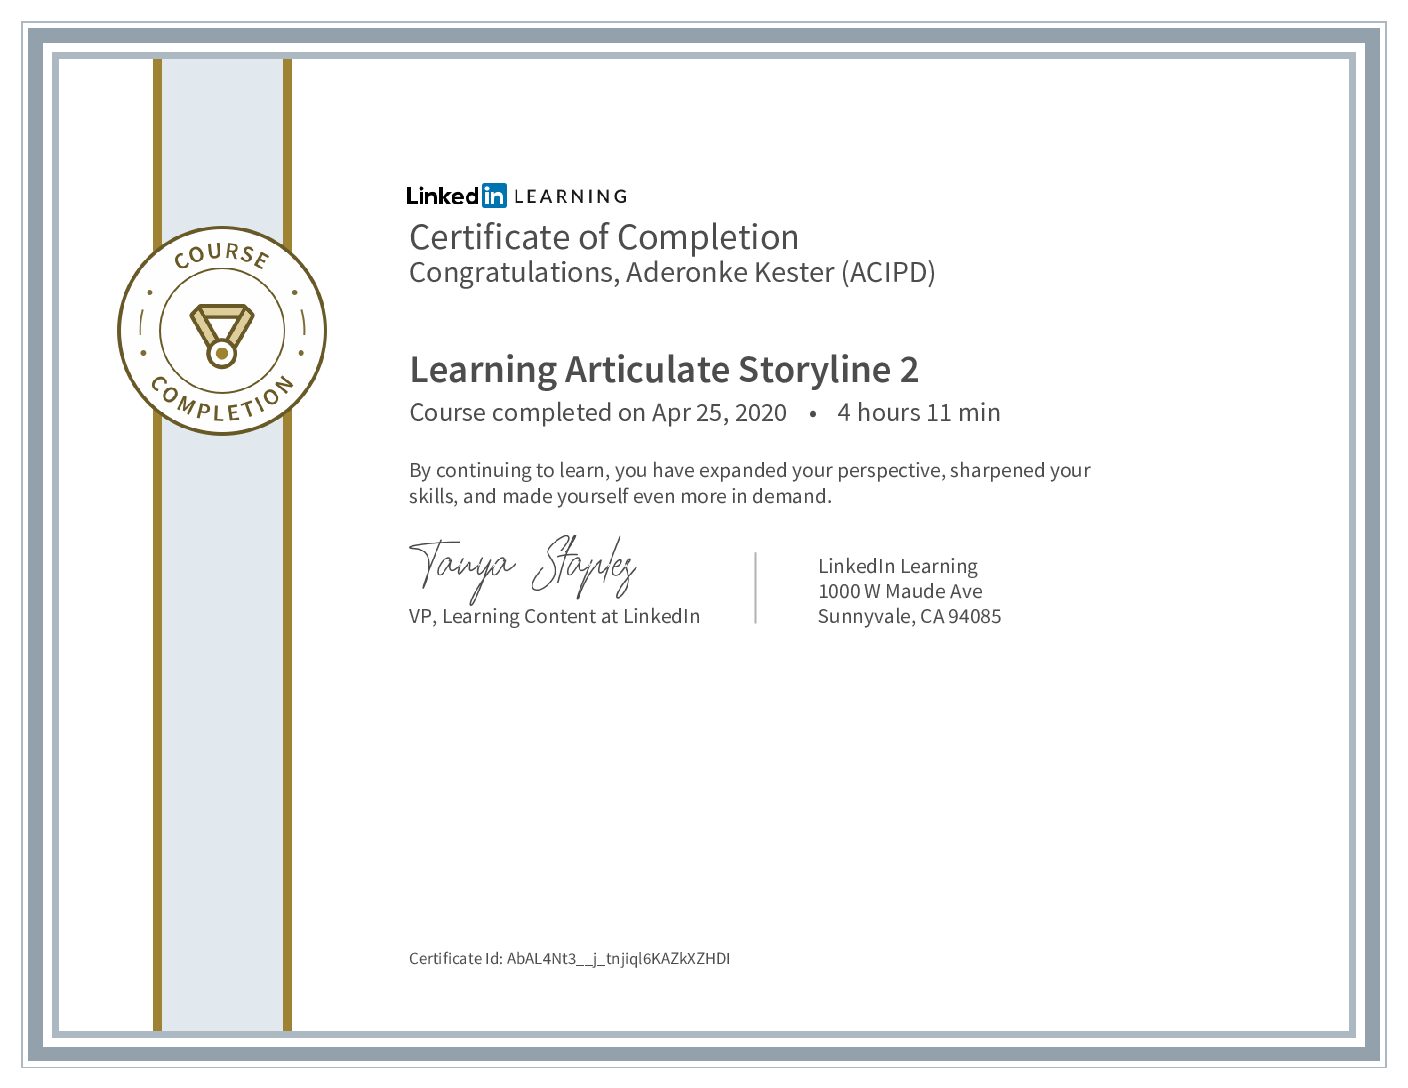 CertificateOfCompletion_Learning Articulate Storyline 2